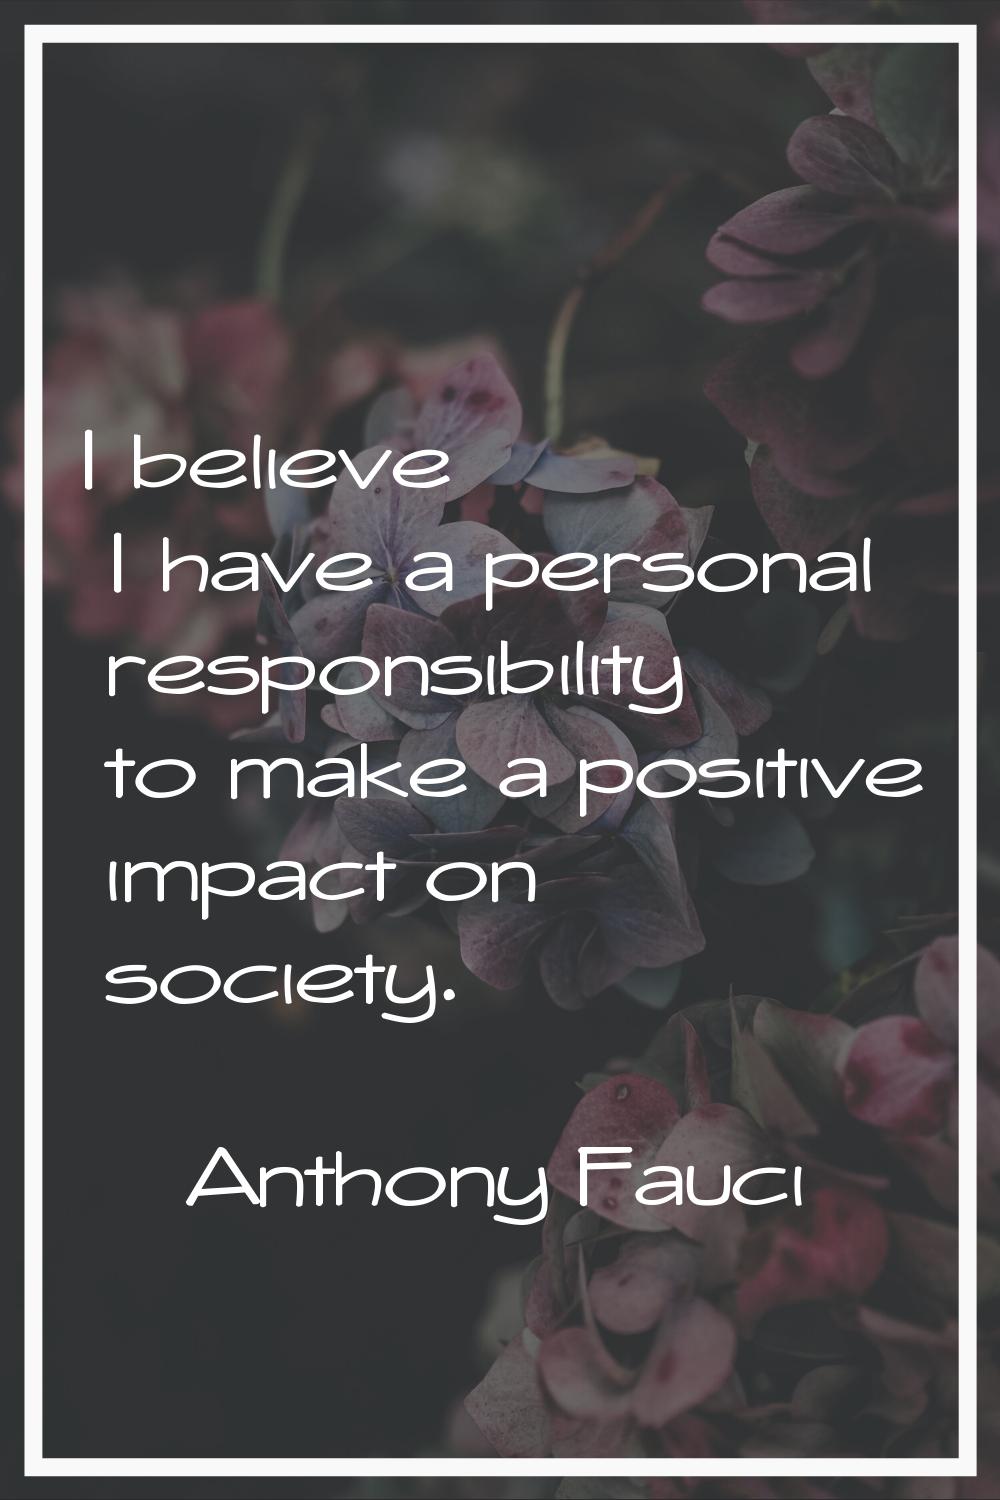 I believe I have a personal responsibility to make a positive impact on society.